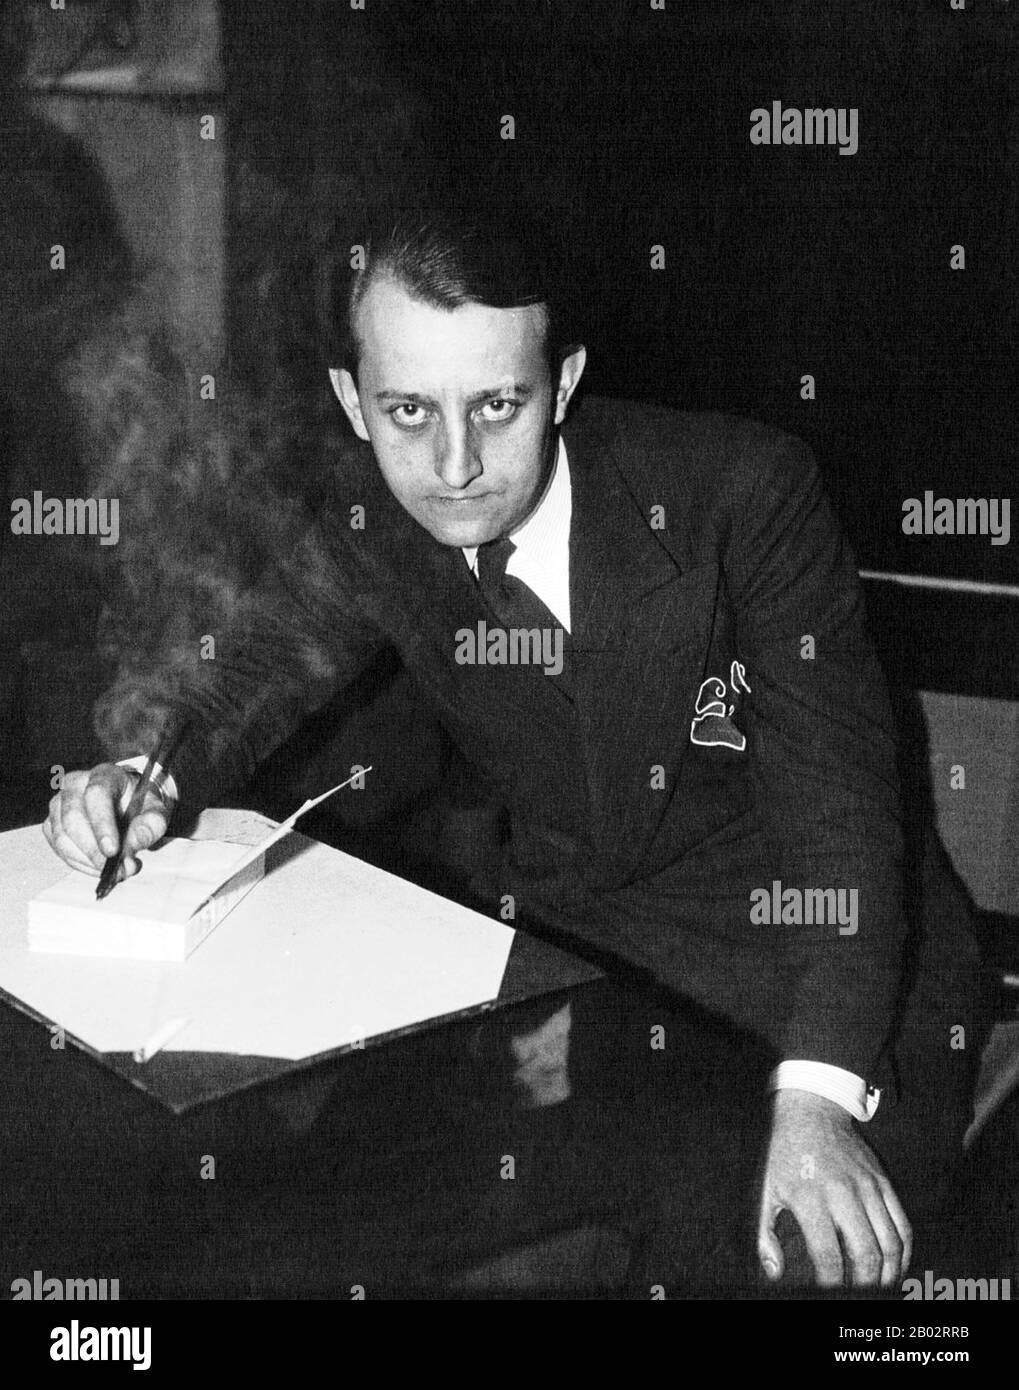 André Malraux DSO (3 November 1901 – 23 November 1976) was a French novelist, art theorist and Minister for Cultural Affairs. Malraux's novel La Condition Humaine (Man's Fate) (1933) won the Prix Goncourt. He was appointed by President Charles de Gaulle as Minister of Information (1945–1946) and subsequently as France's first Minister of Cultural Affairs during de Gaulle's presidency (1959–1969).  In 1923 Malraux undertook a small expedition into unexplored areas of the Cambodian jungle in search of lost Khmer temples, hoping to recover items that might be sold to art museums. On his return, h Stock Photo